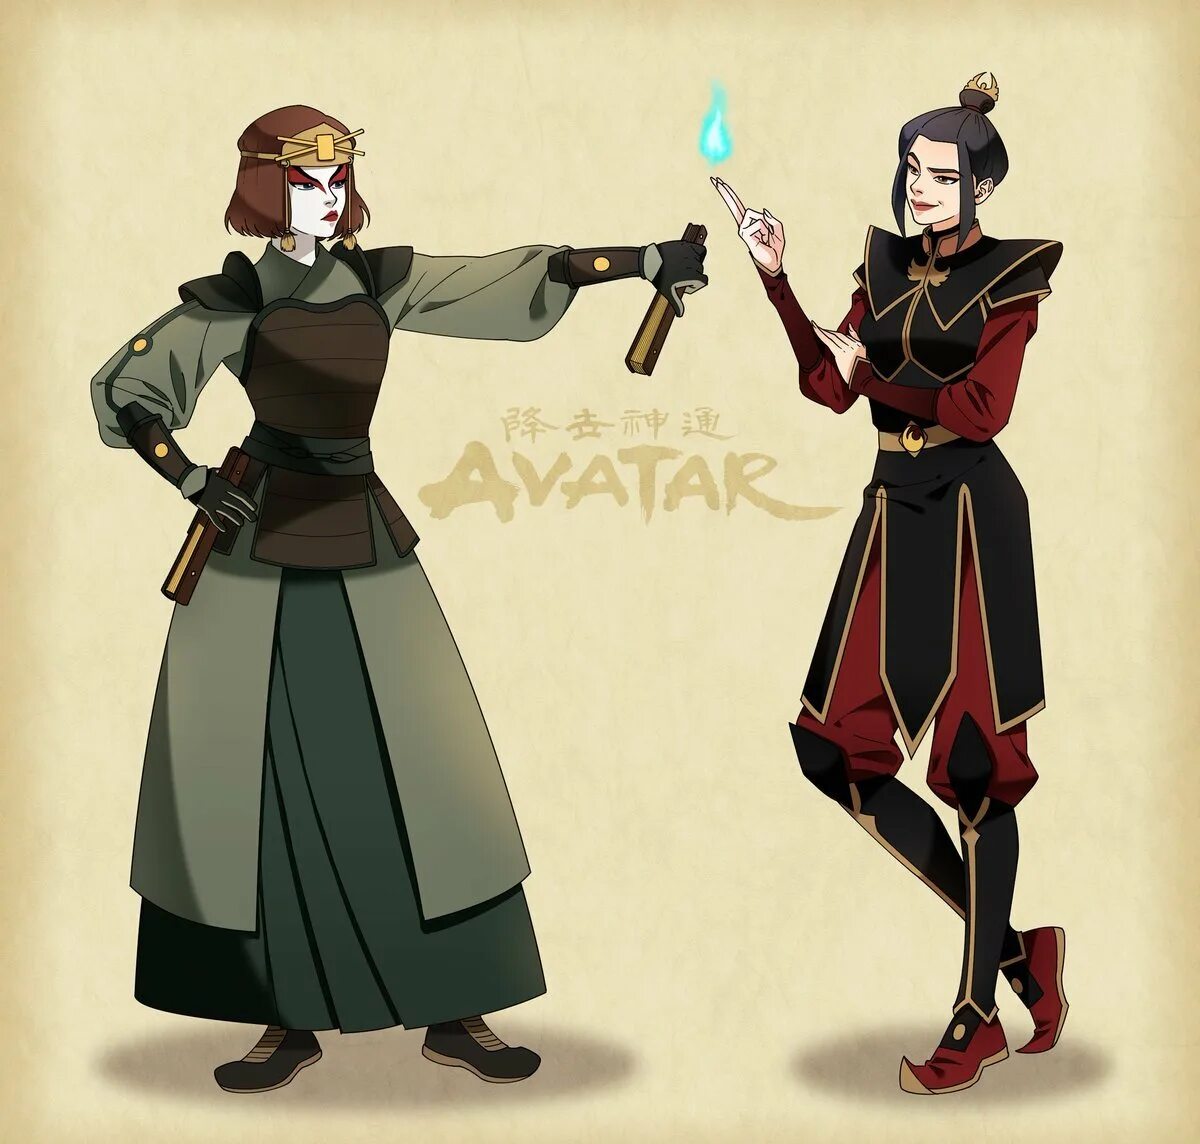 Four elements Trainer Azula. Four elements Trainer азула. 4 Elements Trainer азула. How to Unlock all Azula Scenes 4 element Trainer.